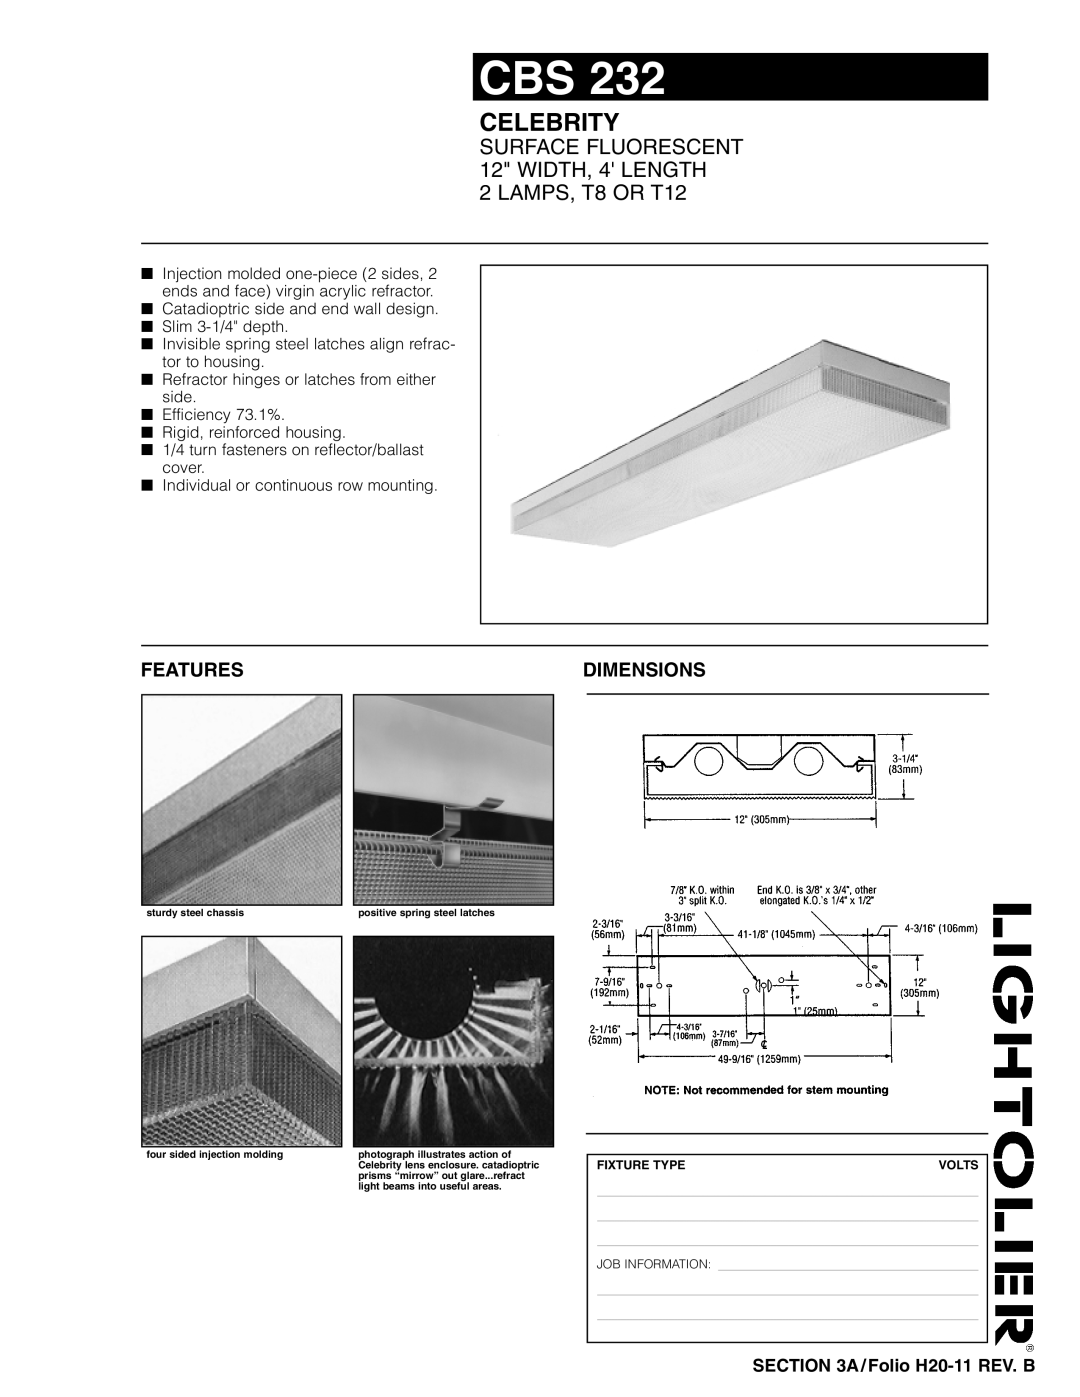 Lightolier CBS 232 dimensions Celebrity, SURFACE FLUORESCENT 12 WIDTH, 4 LENGTH, LAMPS, T8 OR T12, Features, Dimensions 